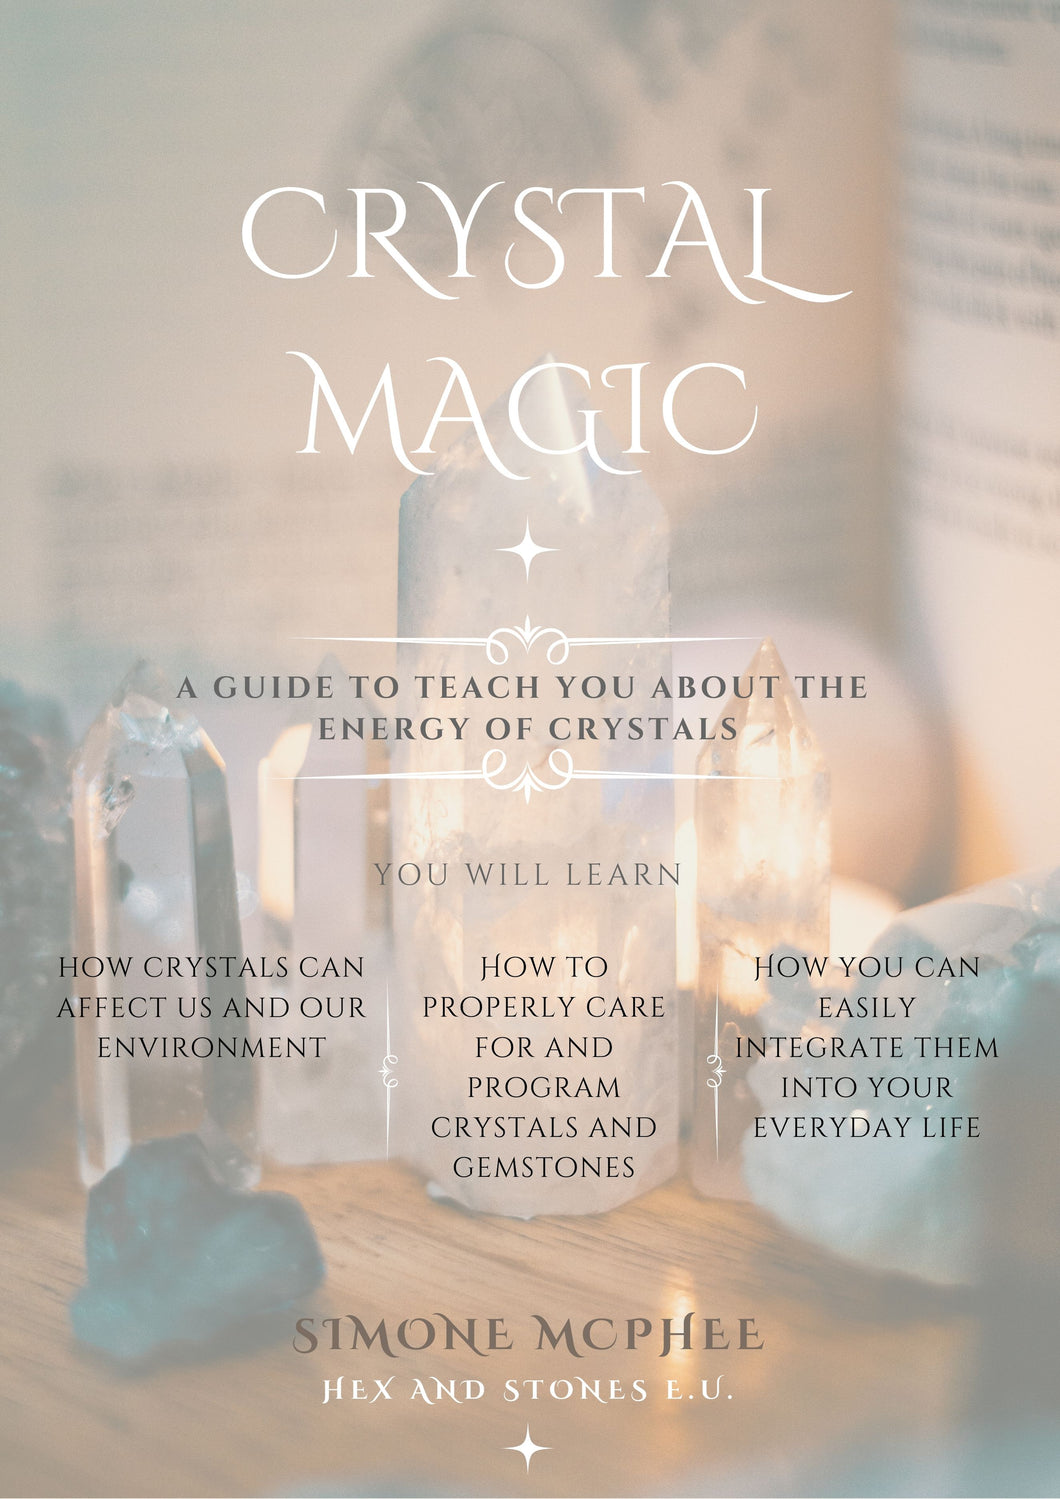 Crystal Magic English Guide I E-Book 44 pages